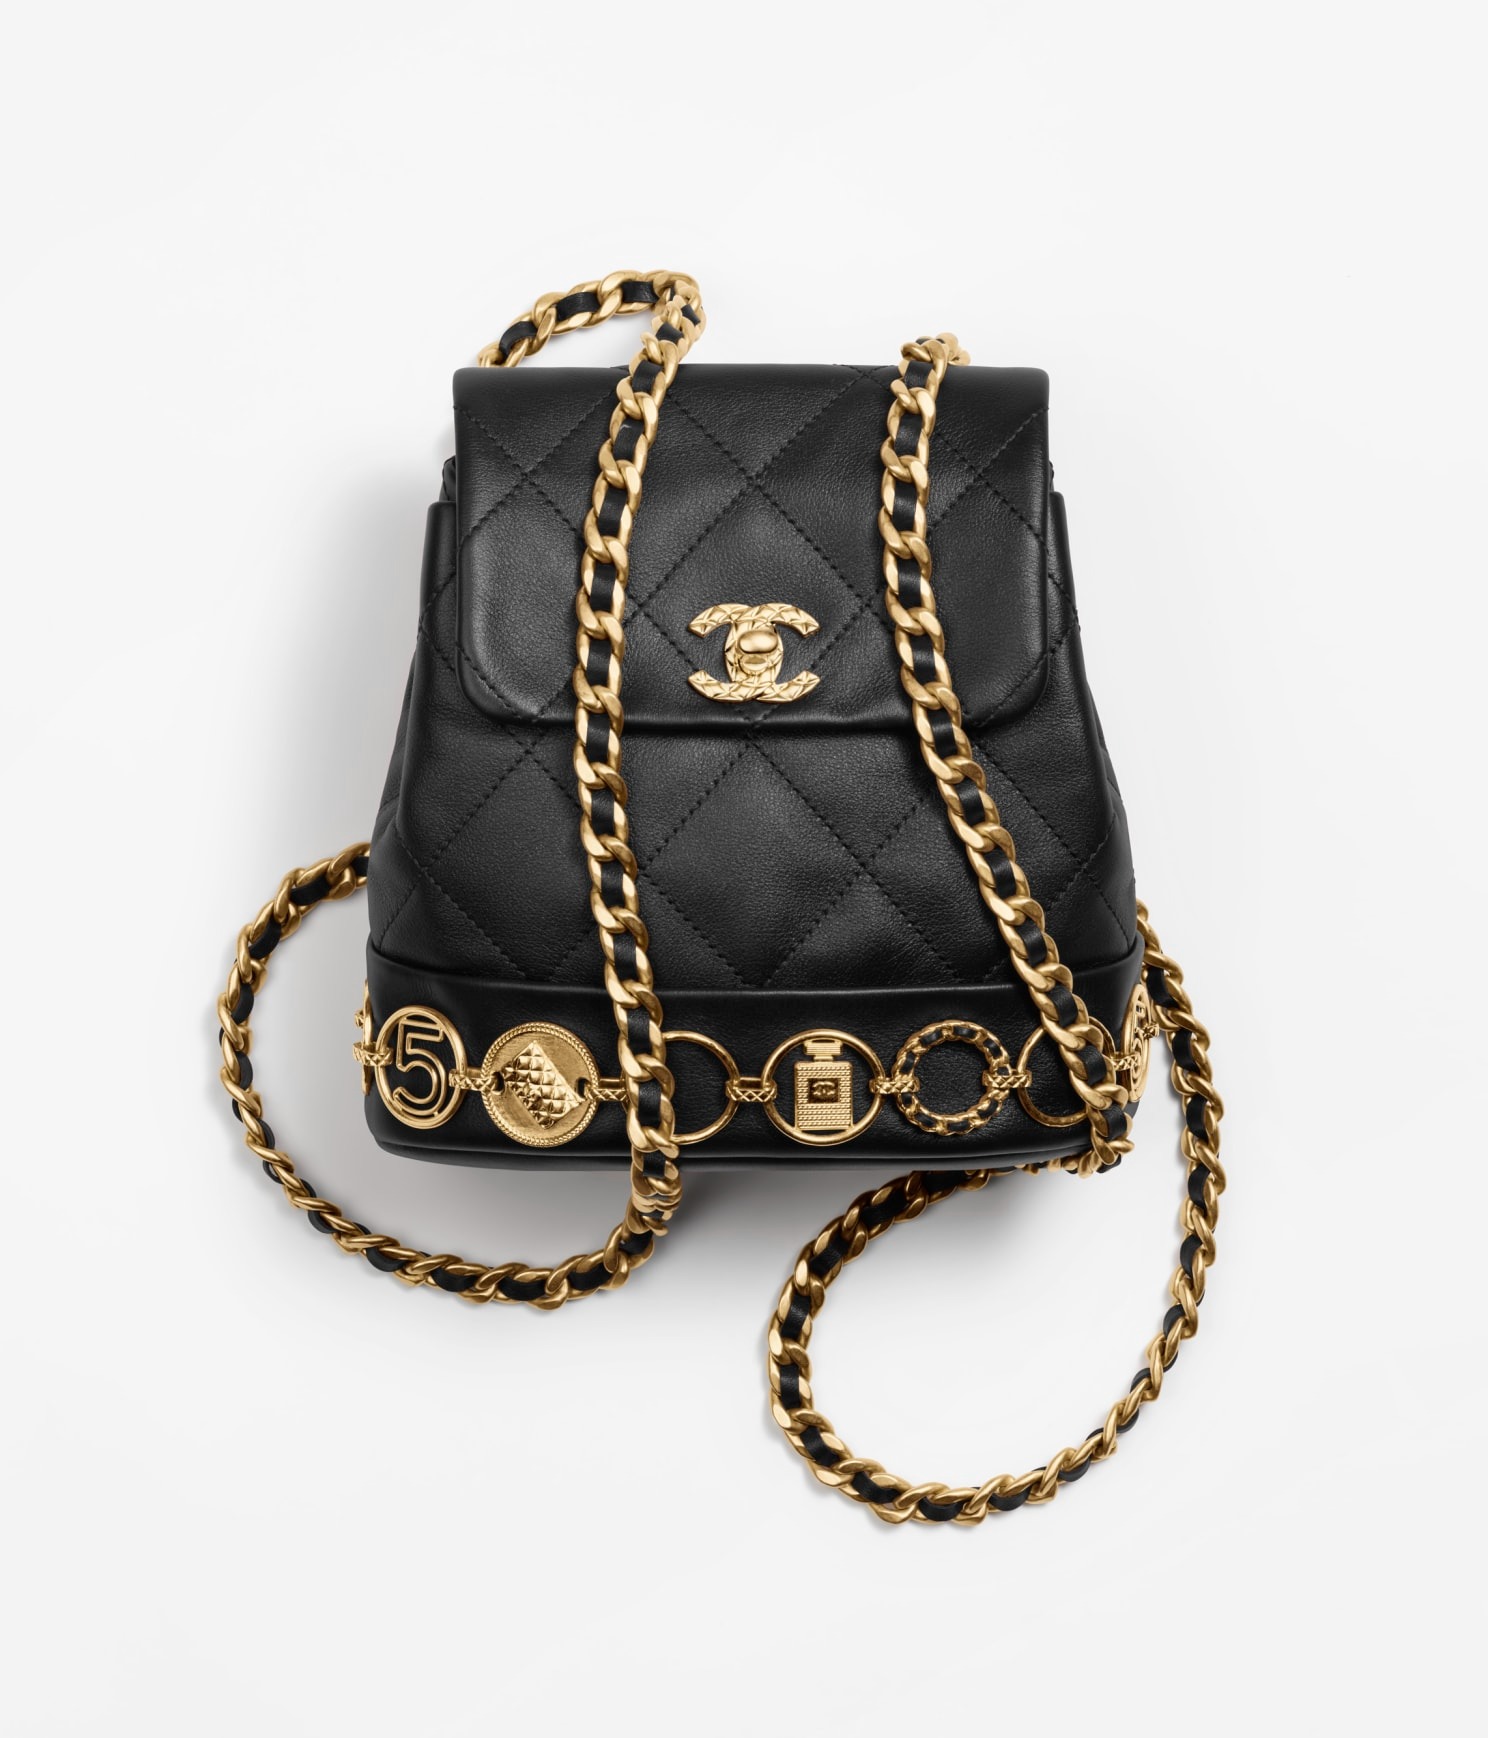 How to Choose Your First Chanel Handbag: 5 Essential Tips